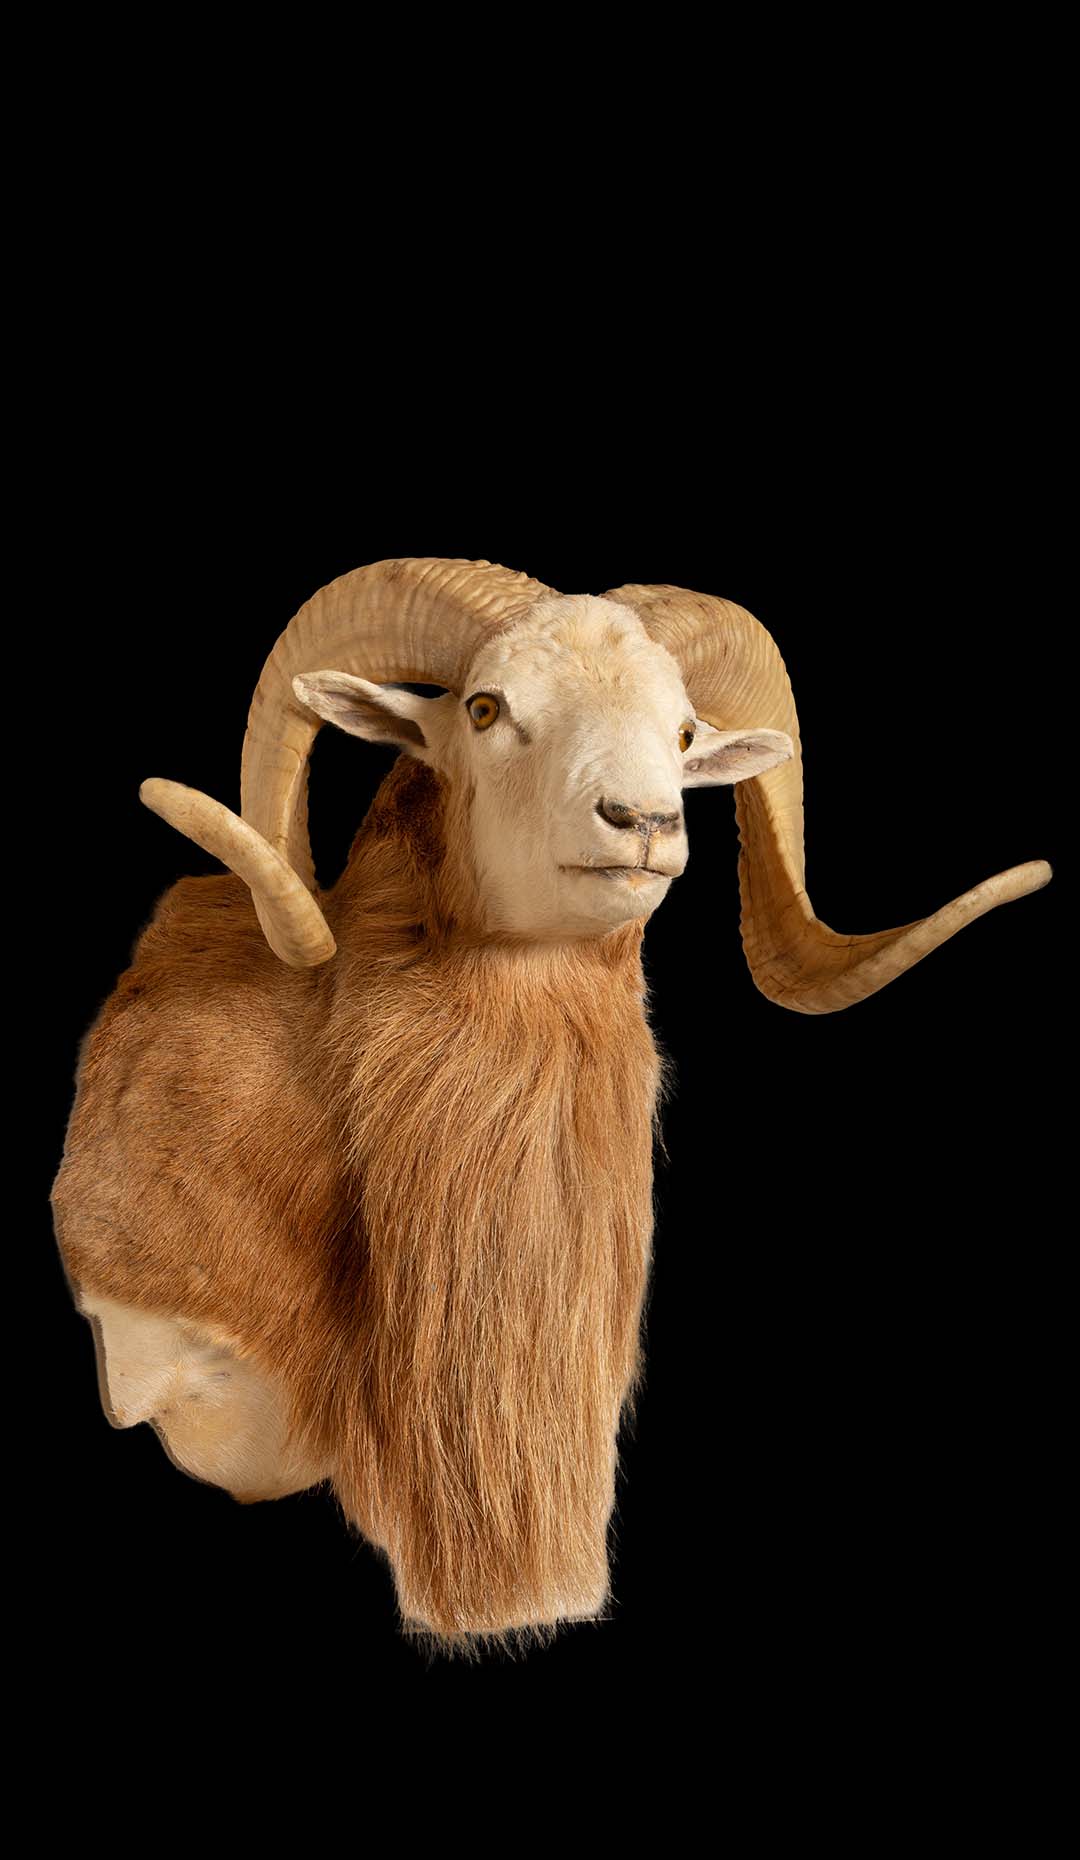 Celebrating the Texas Dall Sheep: A Majestic Wild Species of North America